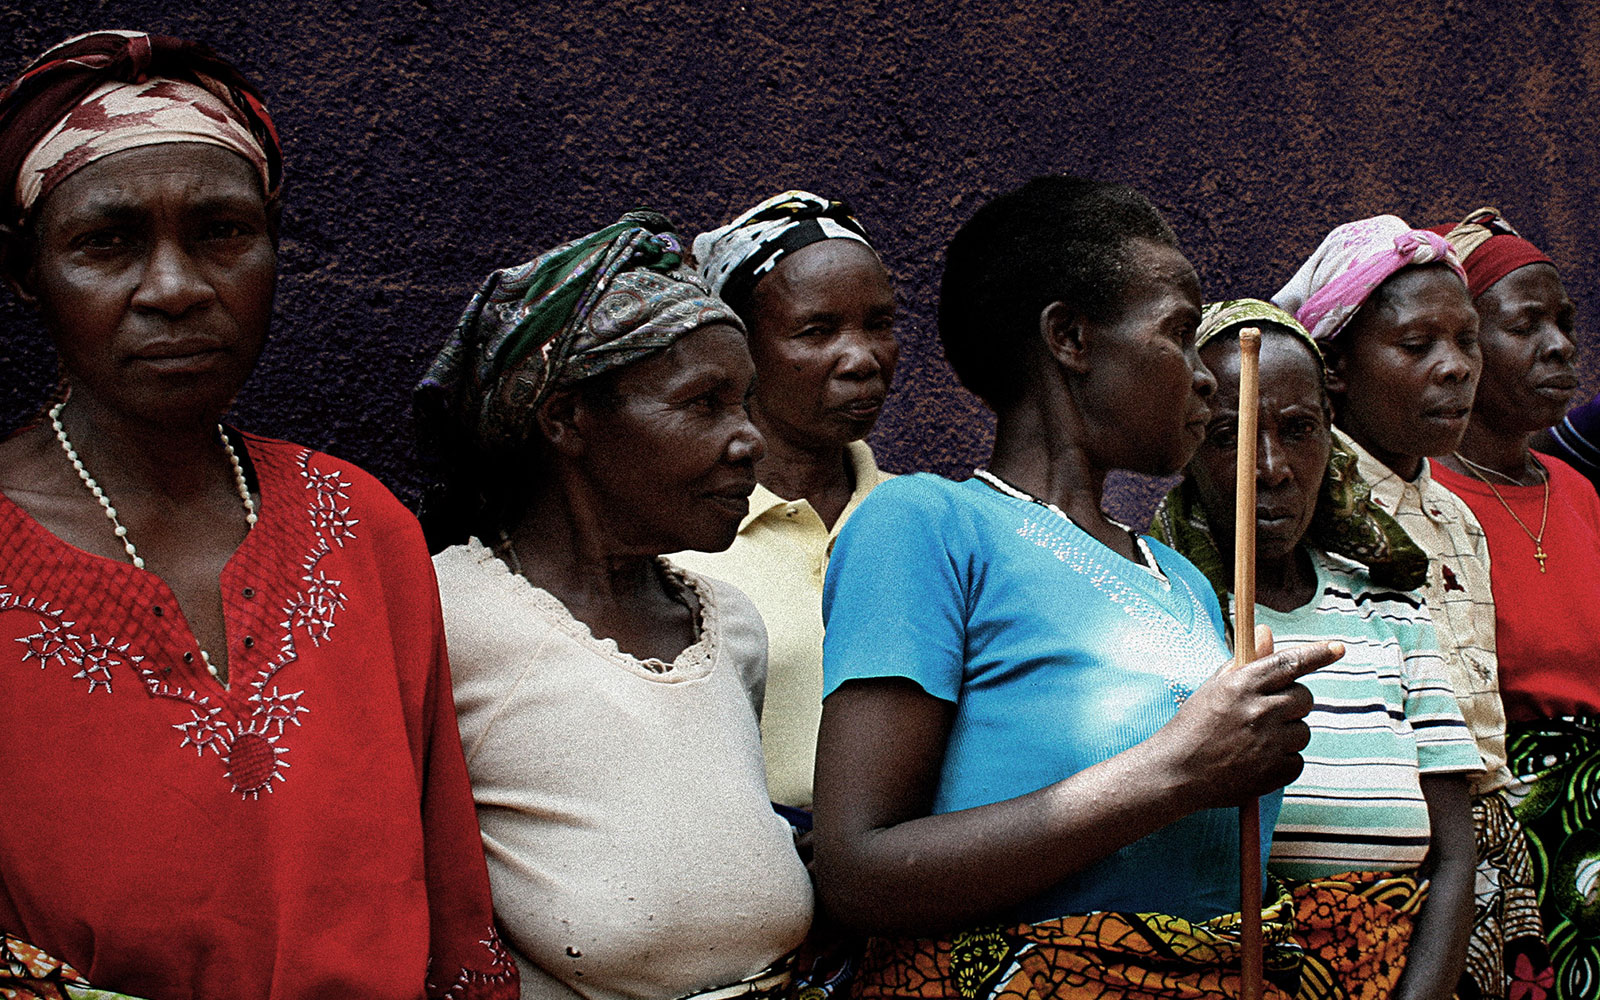 Rwanda, women group, widows due to the genocide. They receive psychological aid from HI.